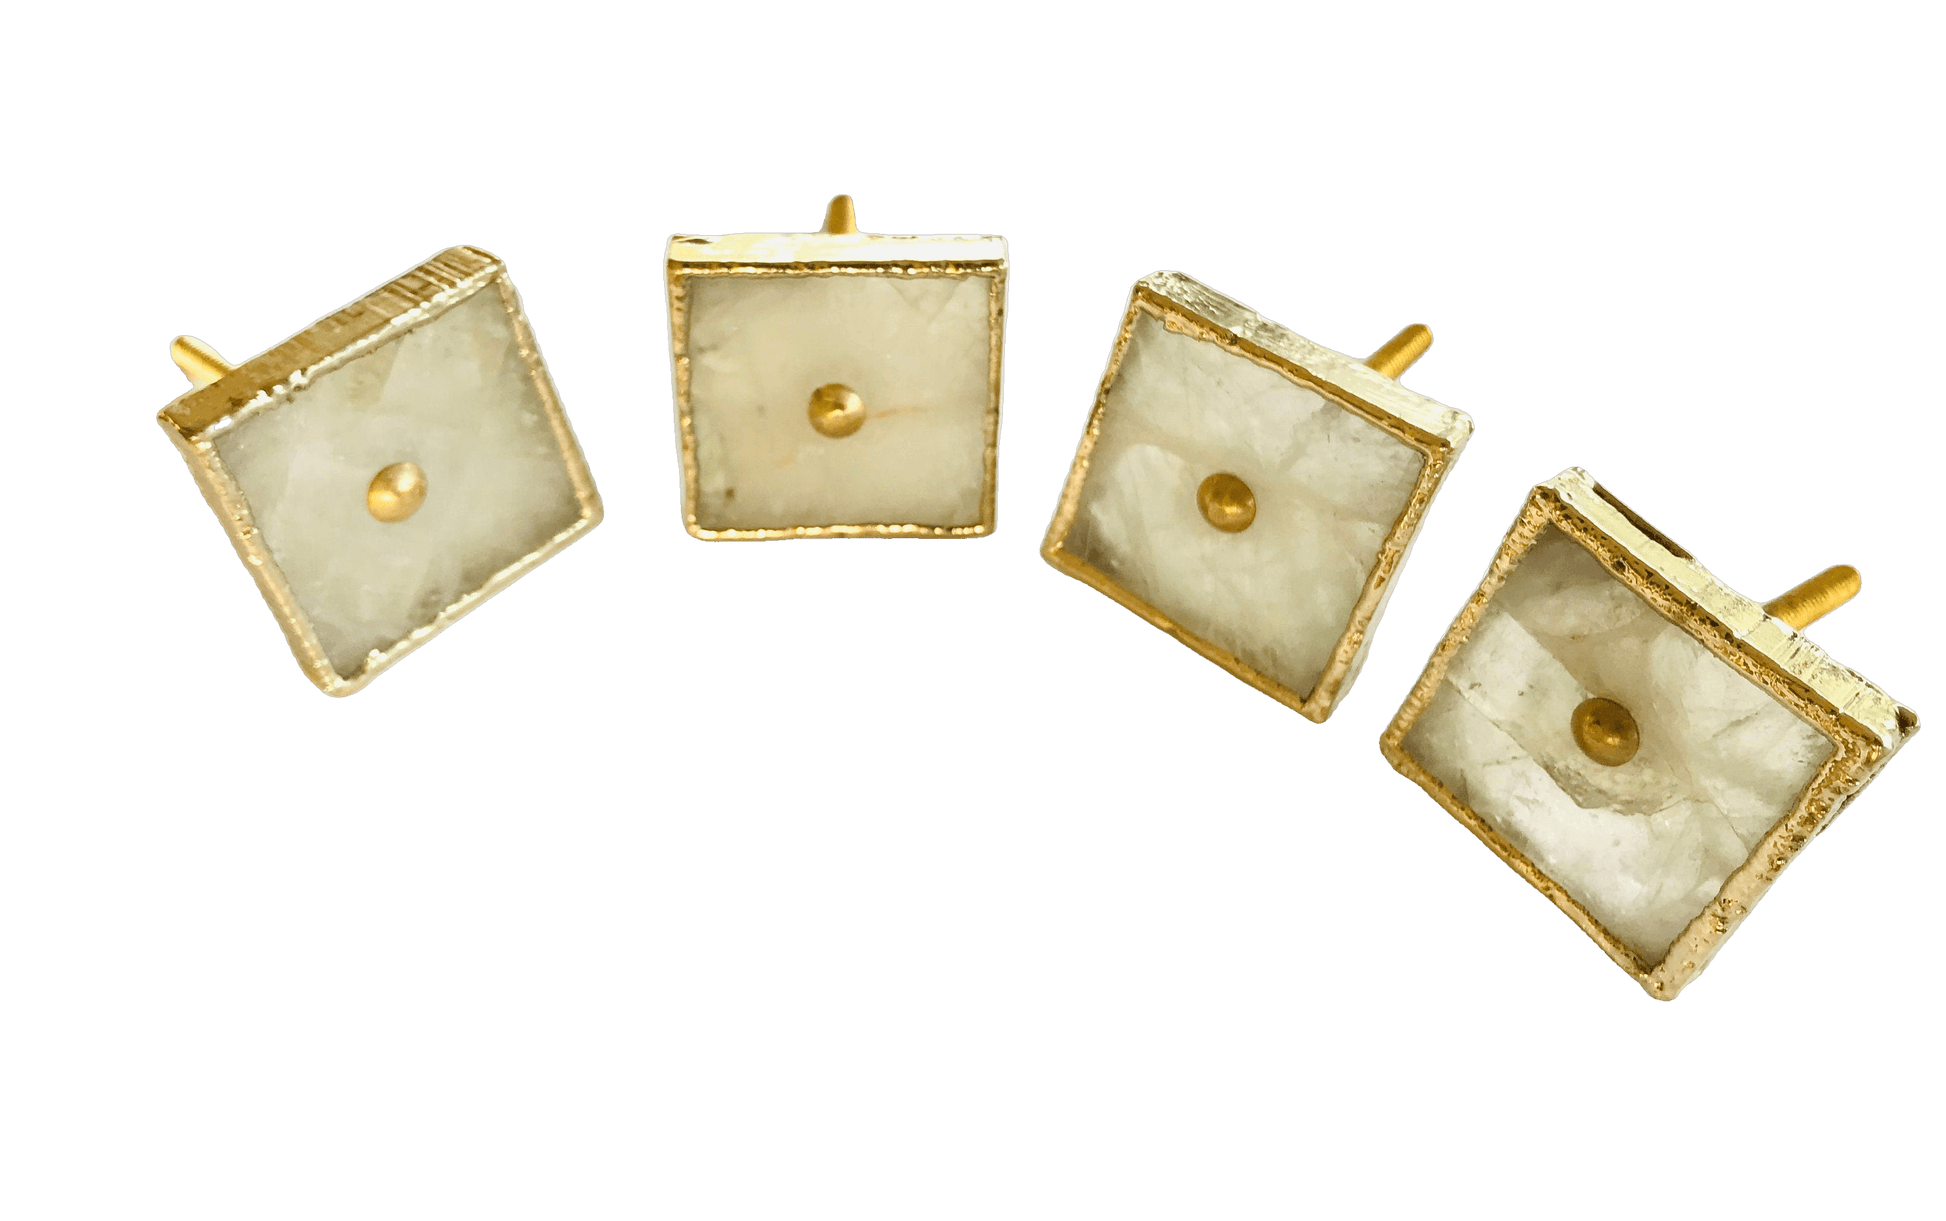 Square White Agate Dresser Cabinet Drawer Pull - Set of 4 - MAIA HOMES